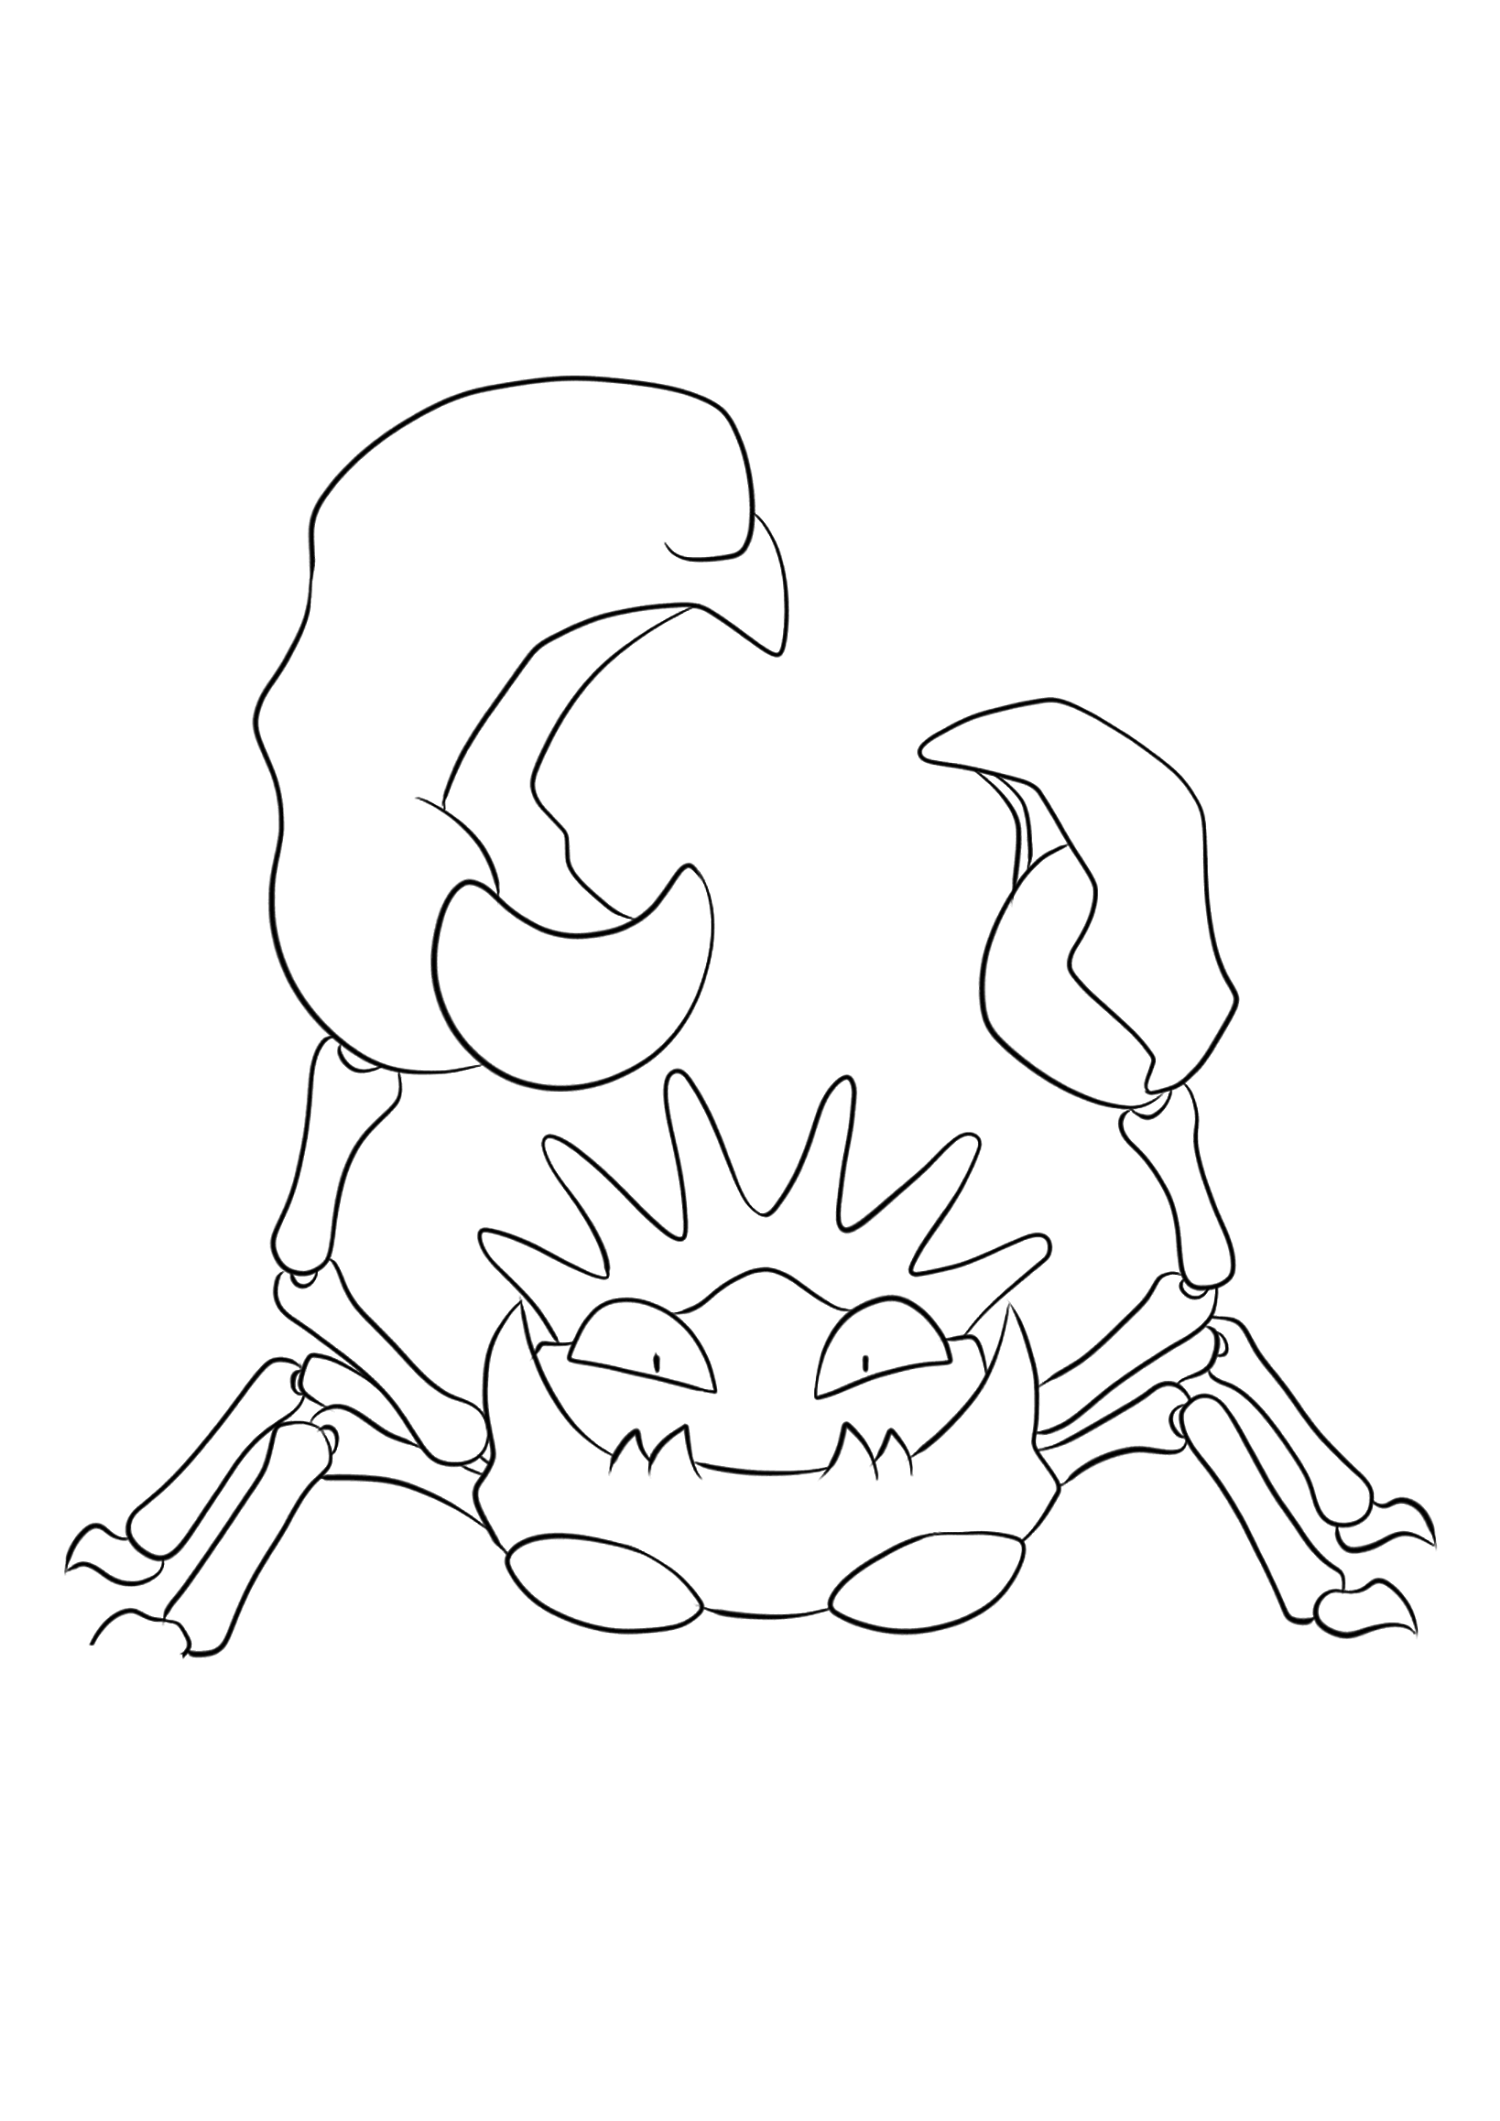 Kingler (No.99). Kingler Coloring page, Generation I Pokemon of type WaterOriginal image credit: Pokemon linearts by Lilly Gerbil on Deviantart.Permission:  All rights reserved © Pokemon company and Ken Sugimori.